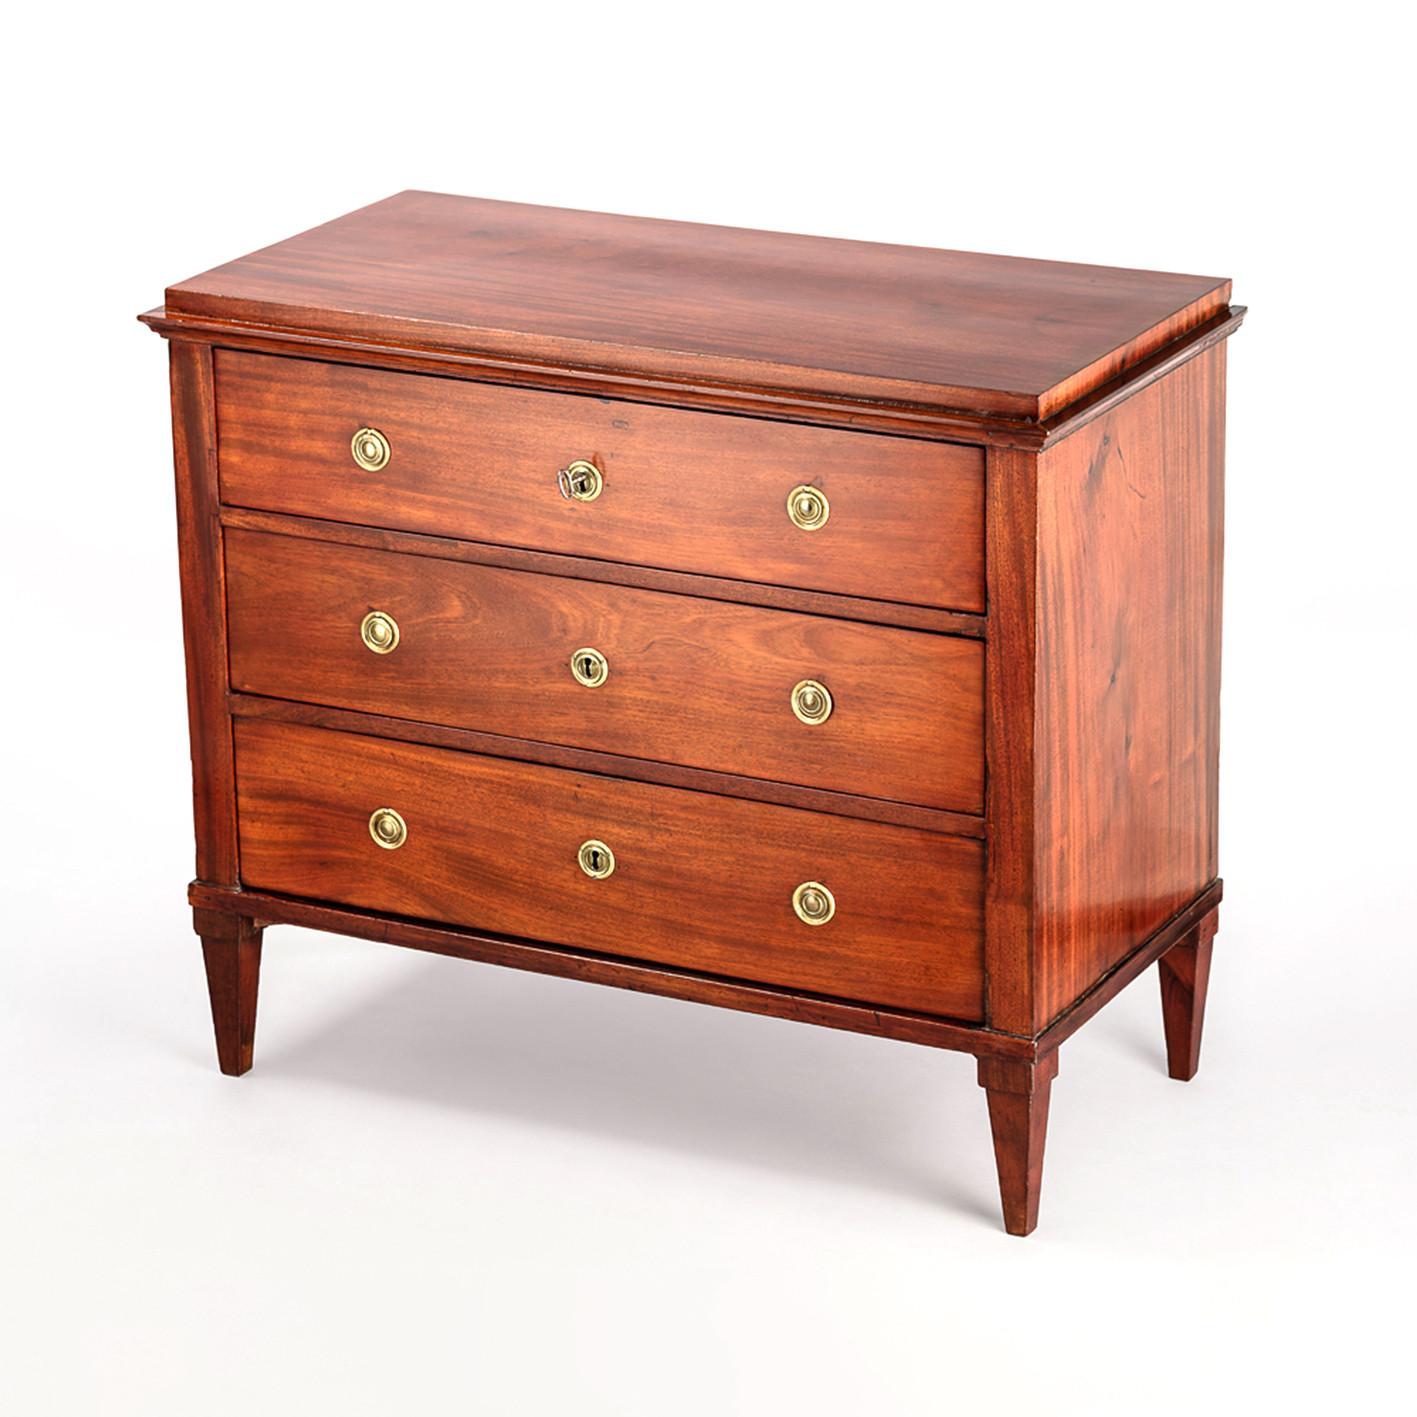 Elegant late Gustavian chest of three drawers.
Cuba mahogany veneered on pine.
In original condition with a light re-polish using traditional methods.
Original fittings, locks and key.